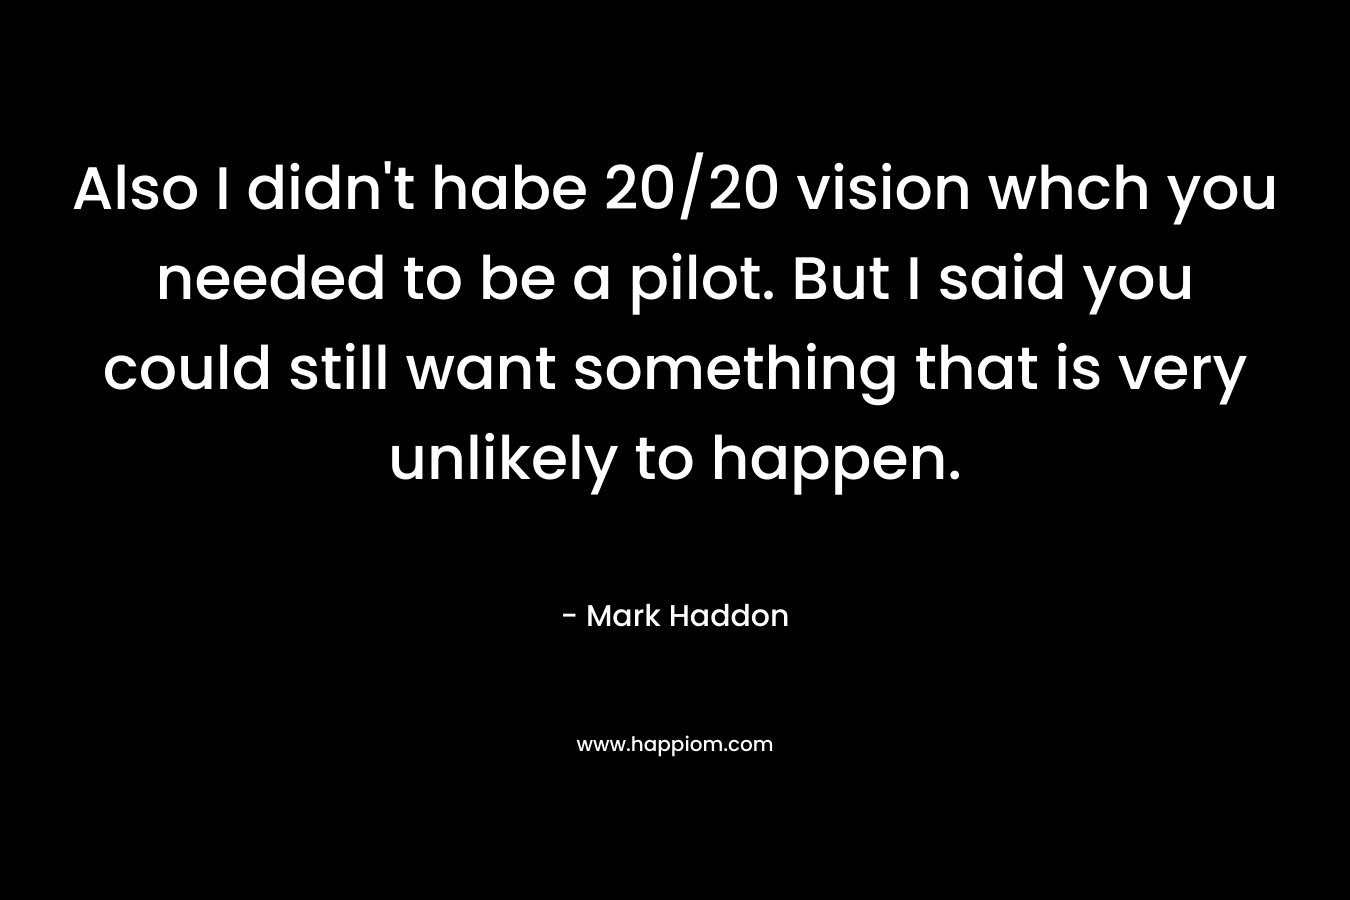 Also I didn’t habe 20/20 vision whch you needed to be a pilot. But I said you could still want something that is very unlikely to happen. – Mark Haddon